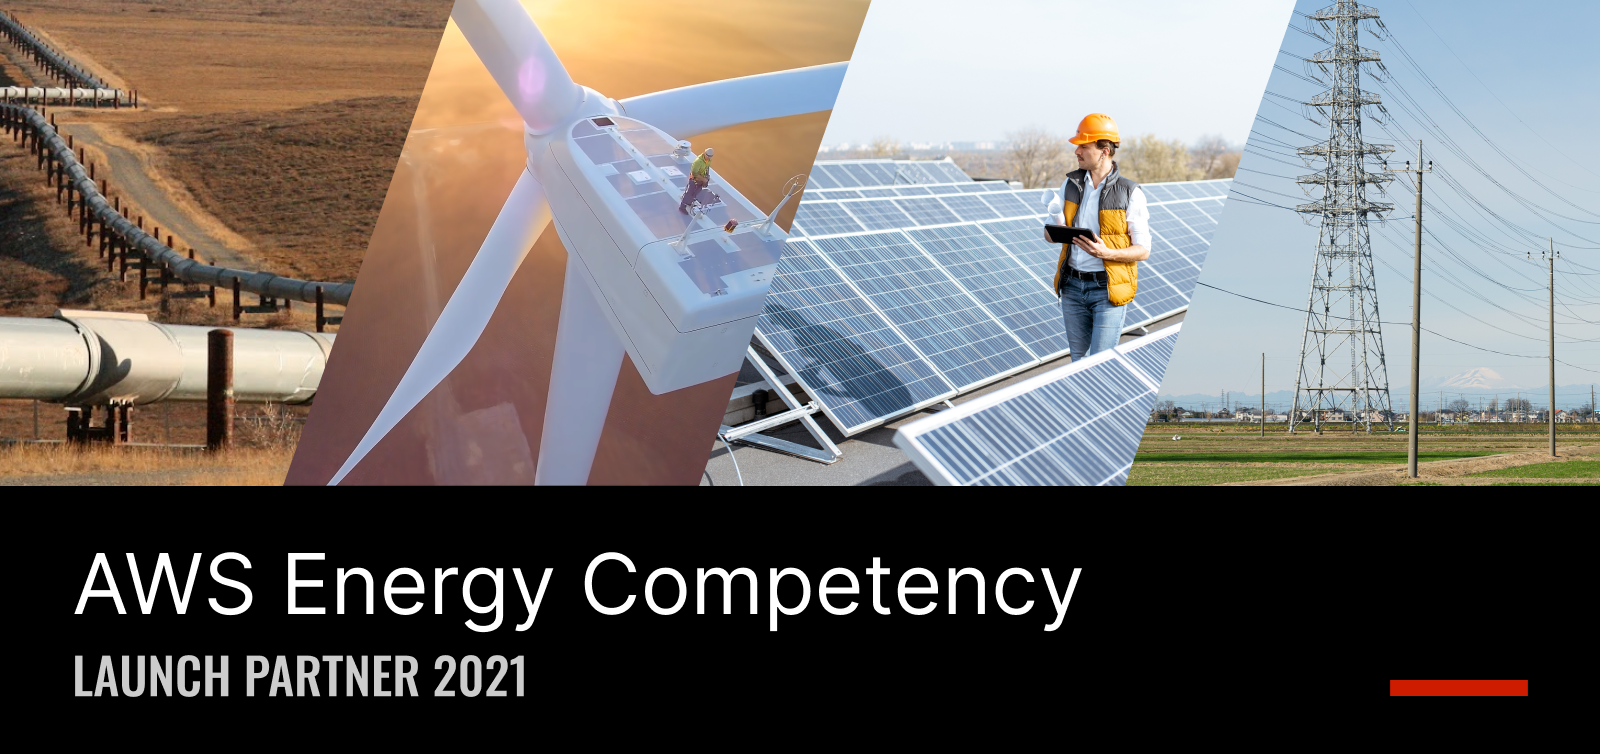 Featured image: Unleash live AWS Energy Competency announcement  - Read full post: AWS Announces Unleash live as Energy Competency Launch Partner